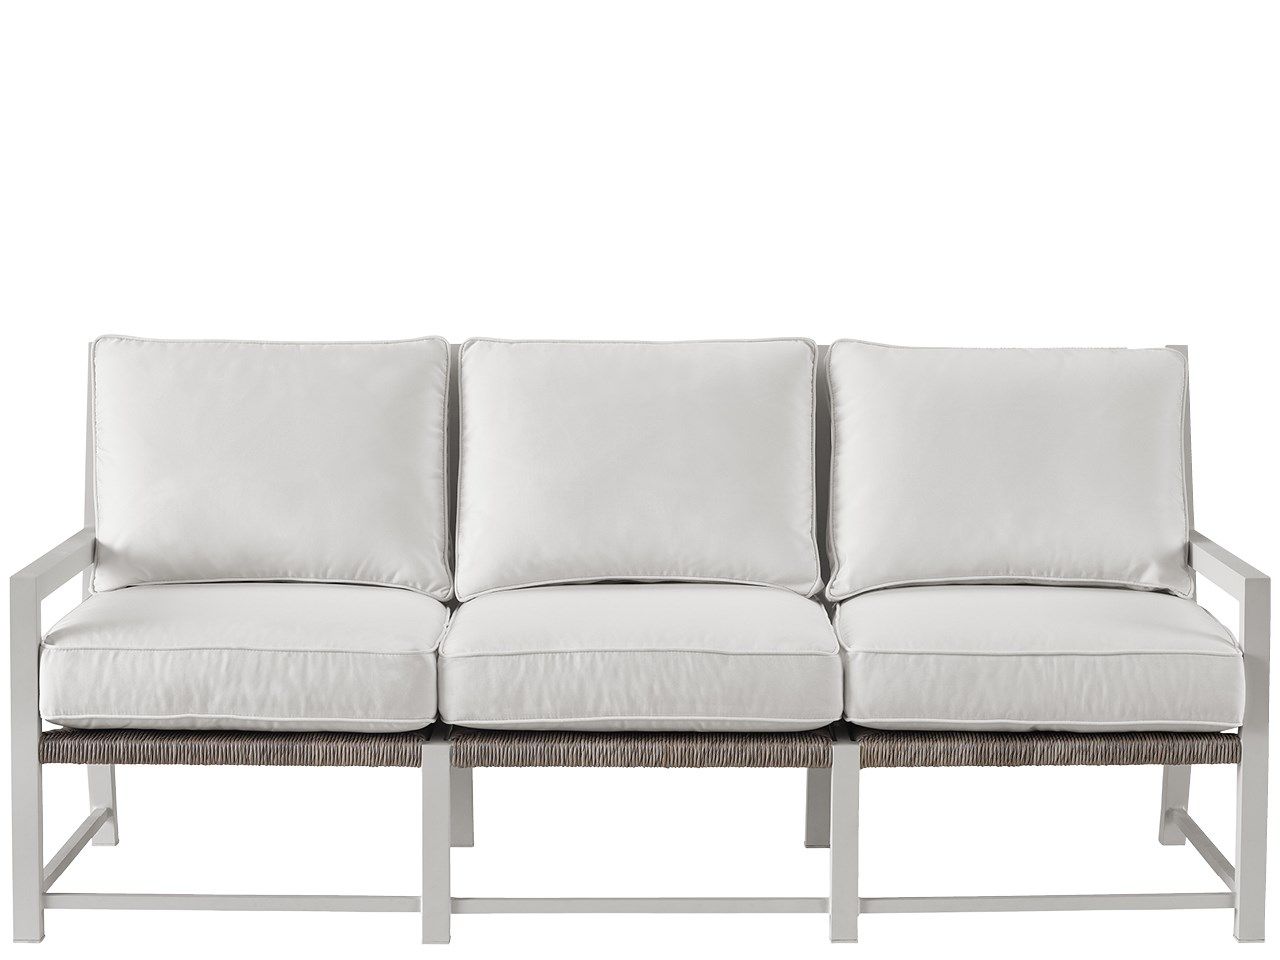 Tybee - Sofa -Special Order - White